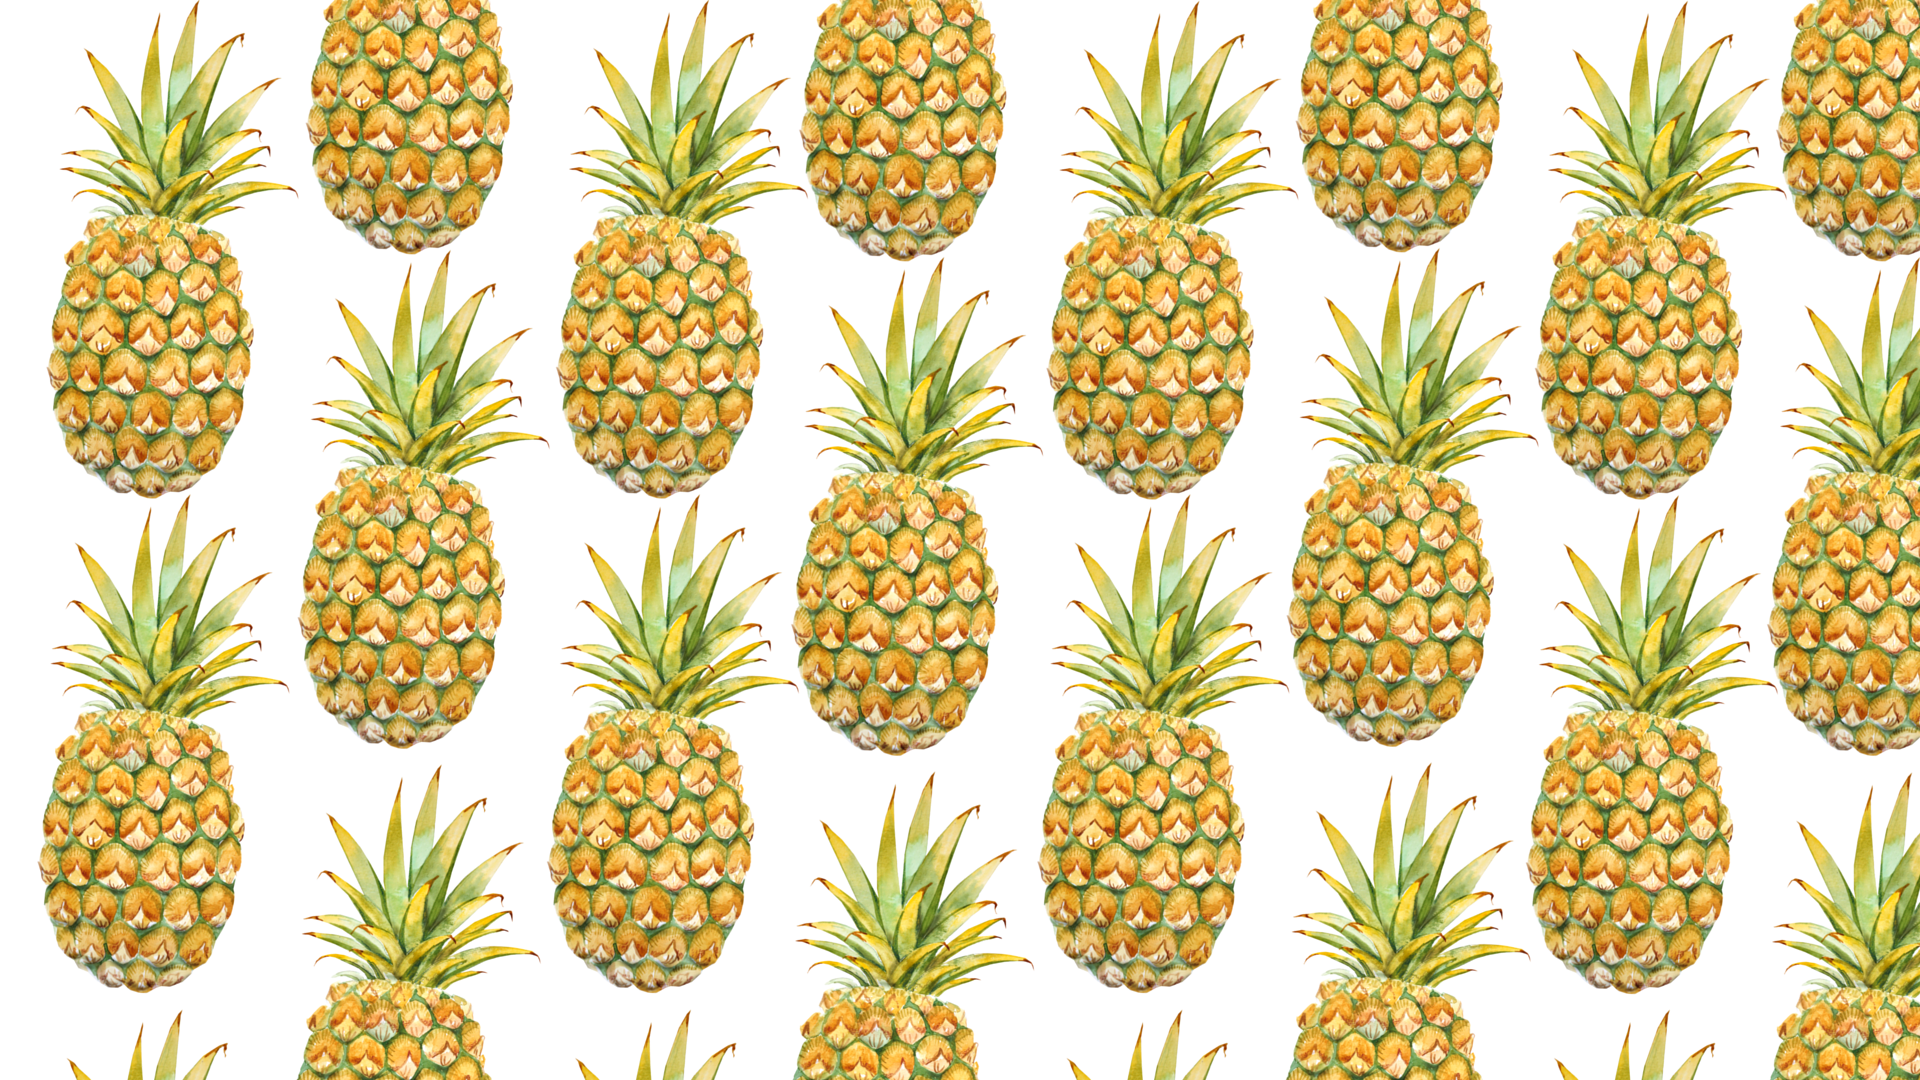 Summer Desktop and iPhone Background!. iPhone background, Pineapple wallpaper, Summer background